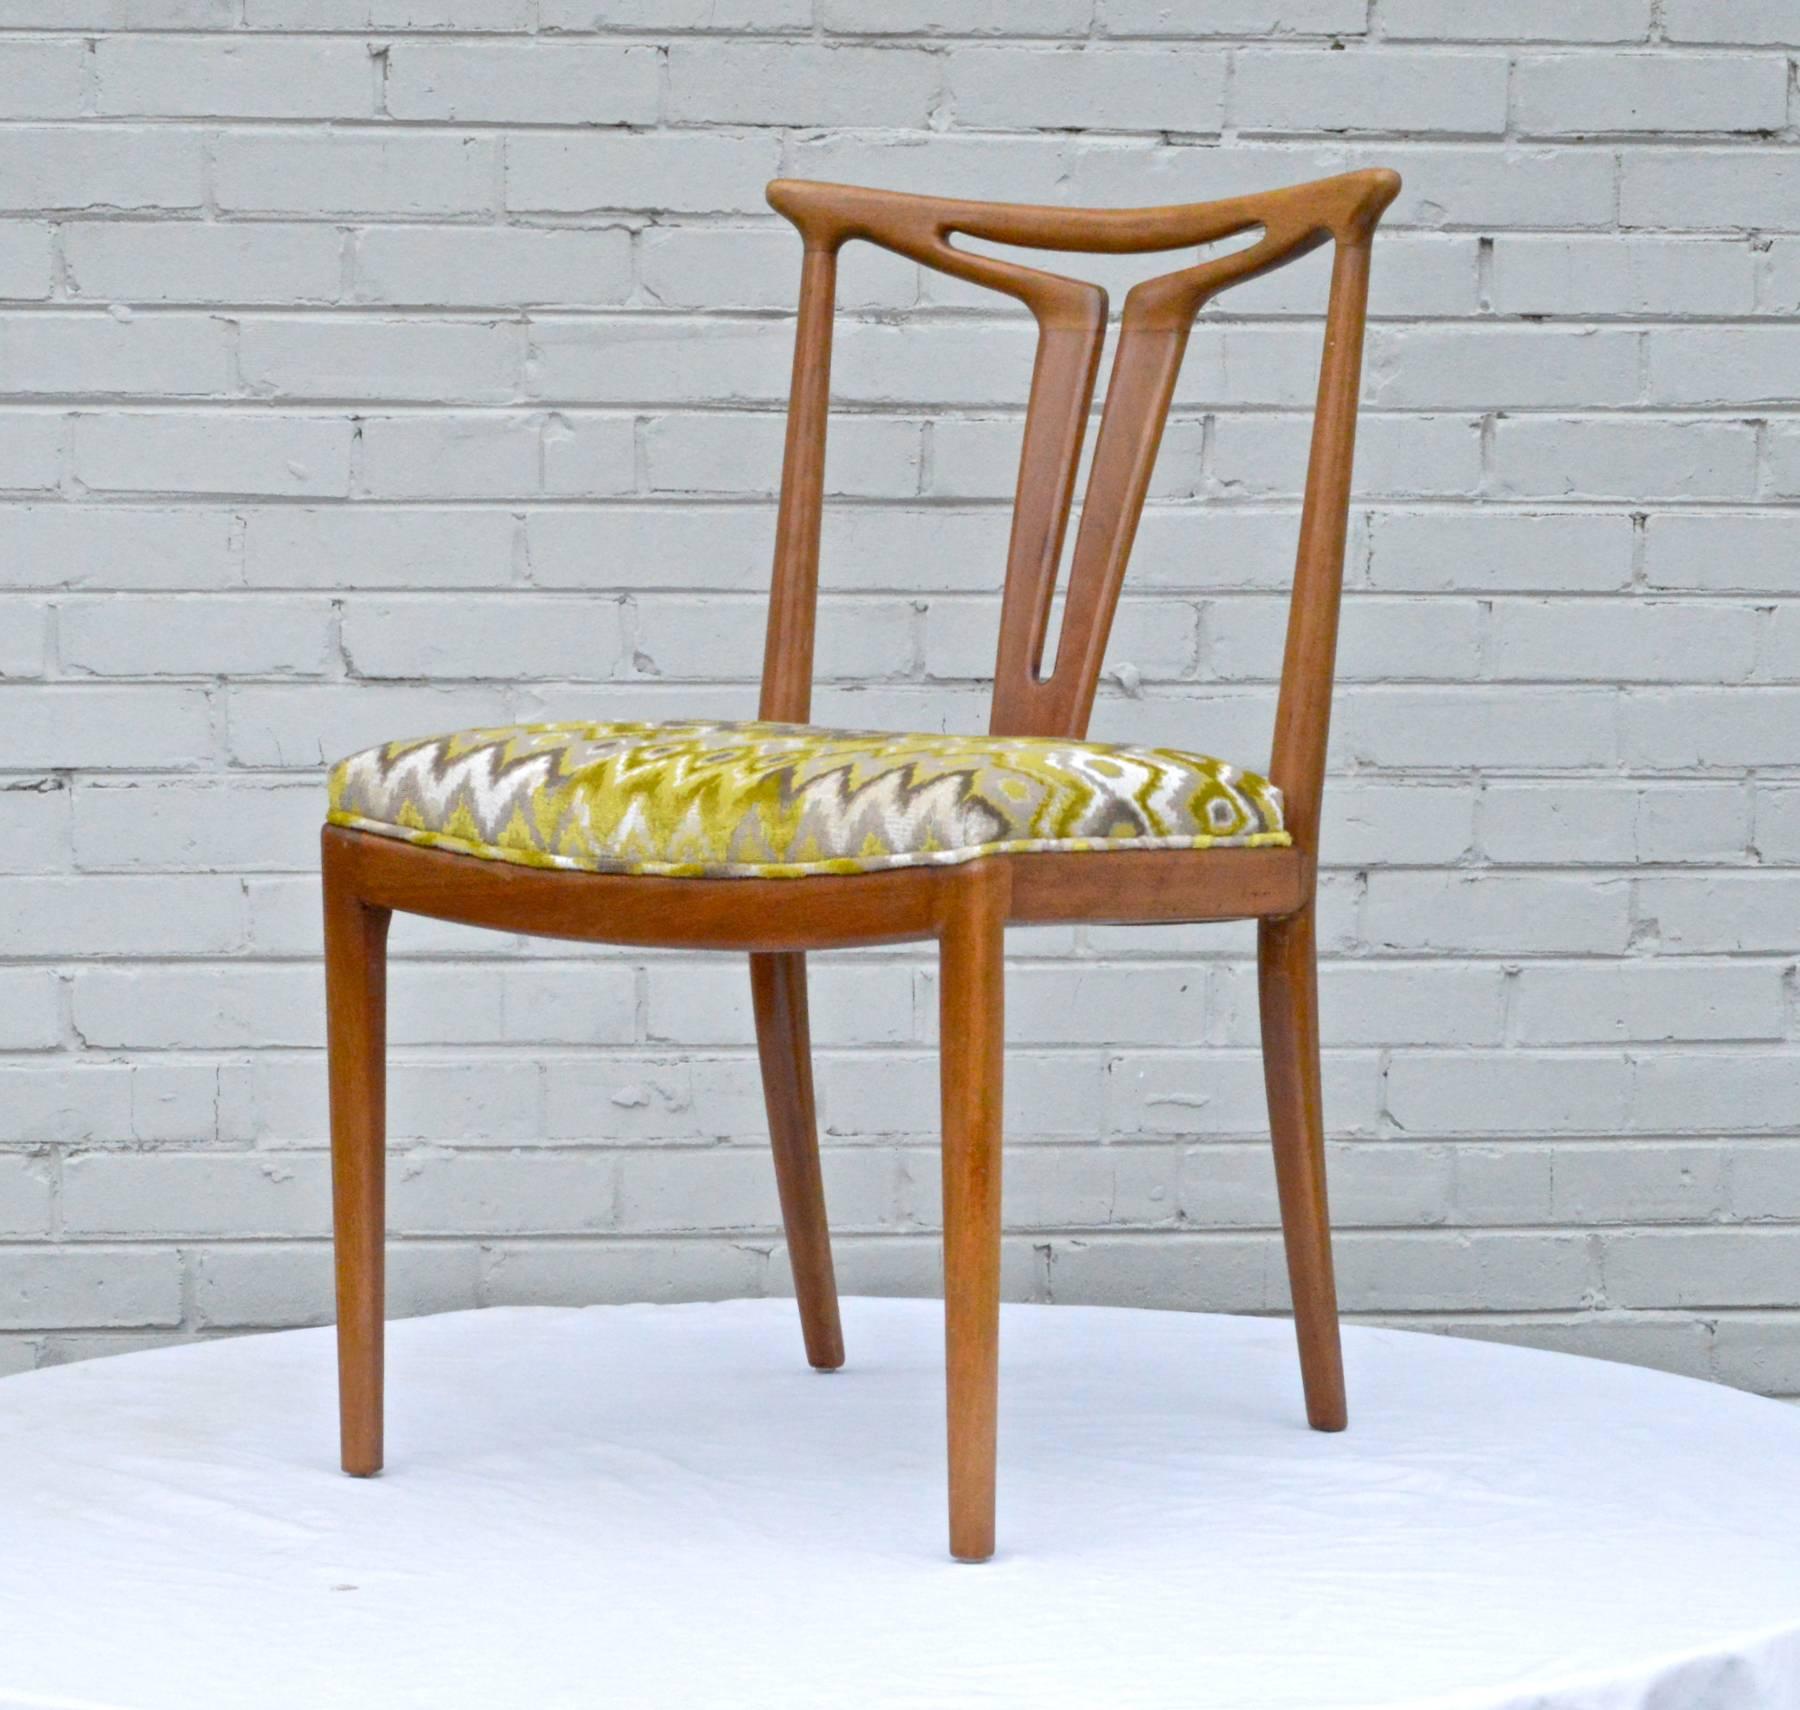 20th Century American Modern Chair Quad with T-Back Splats